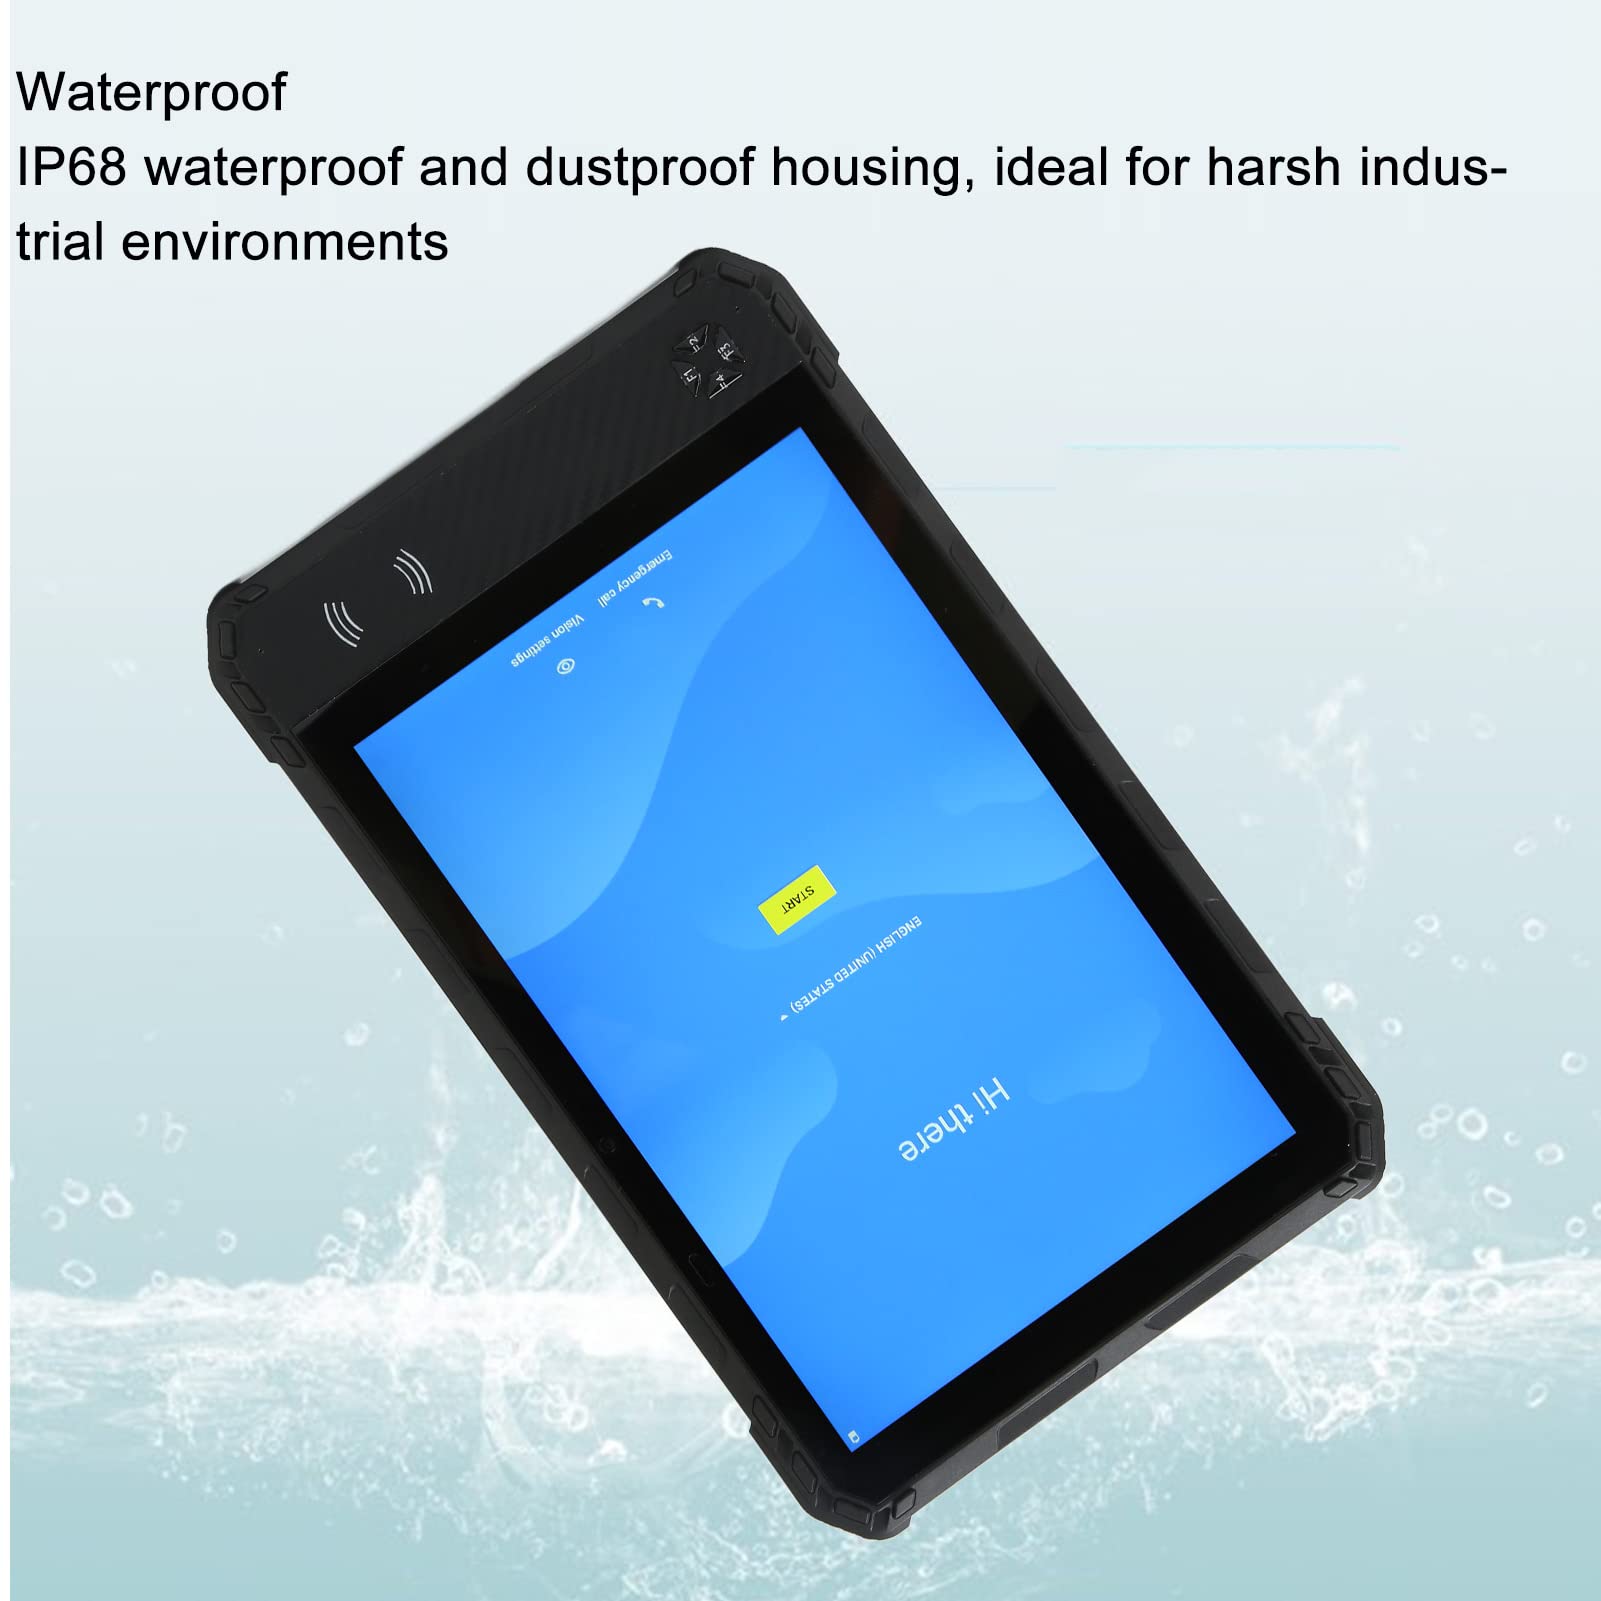 Rugged Tablet,10 inch Tablet, IP68 Waterproof Dual WiFi 10000mAh Octa Core Tablet for Android 11, Rugged Tablet for Warehouses, Geological Surveys Buildings (US Plug)